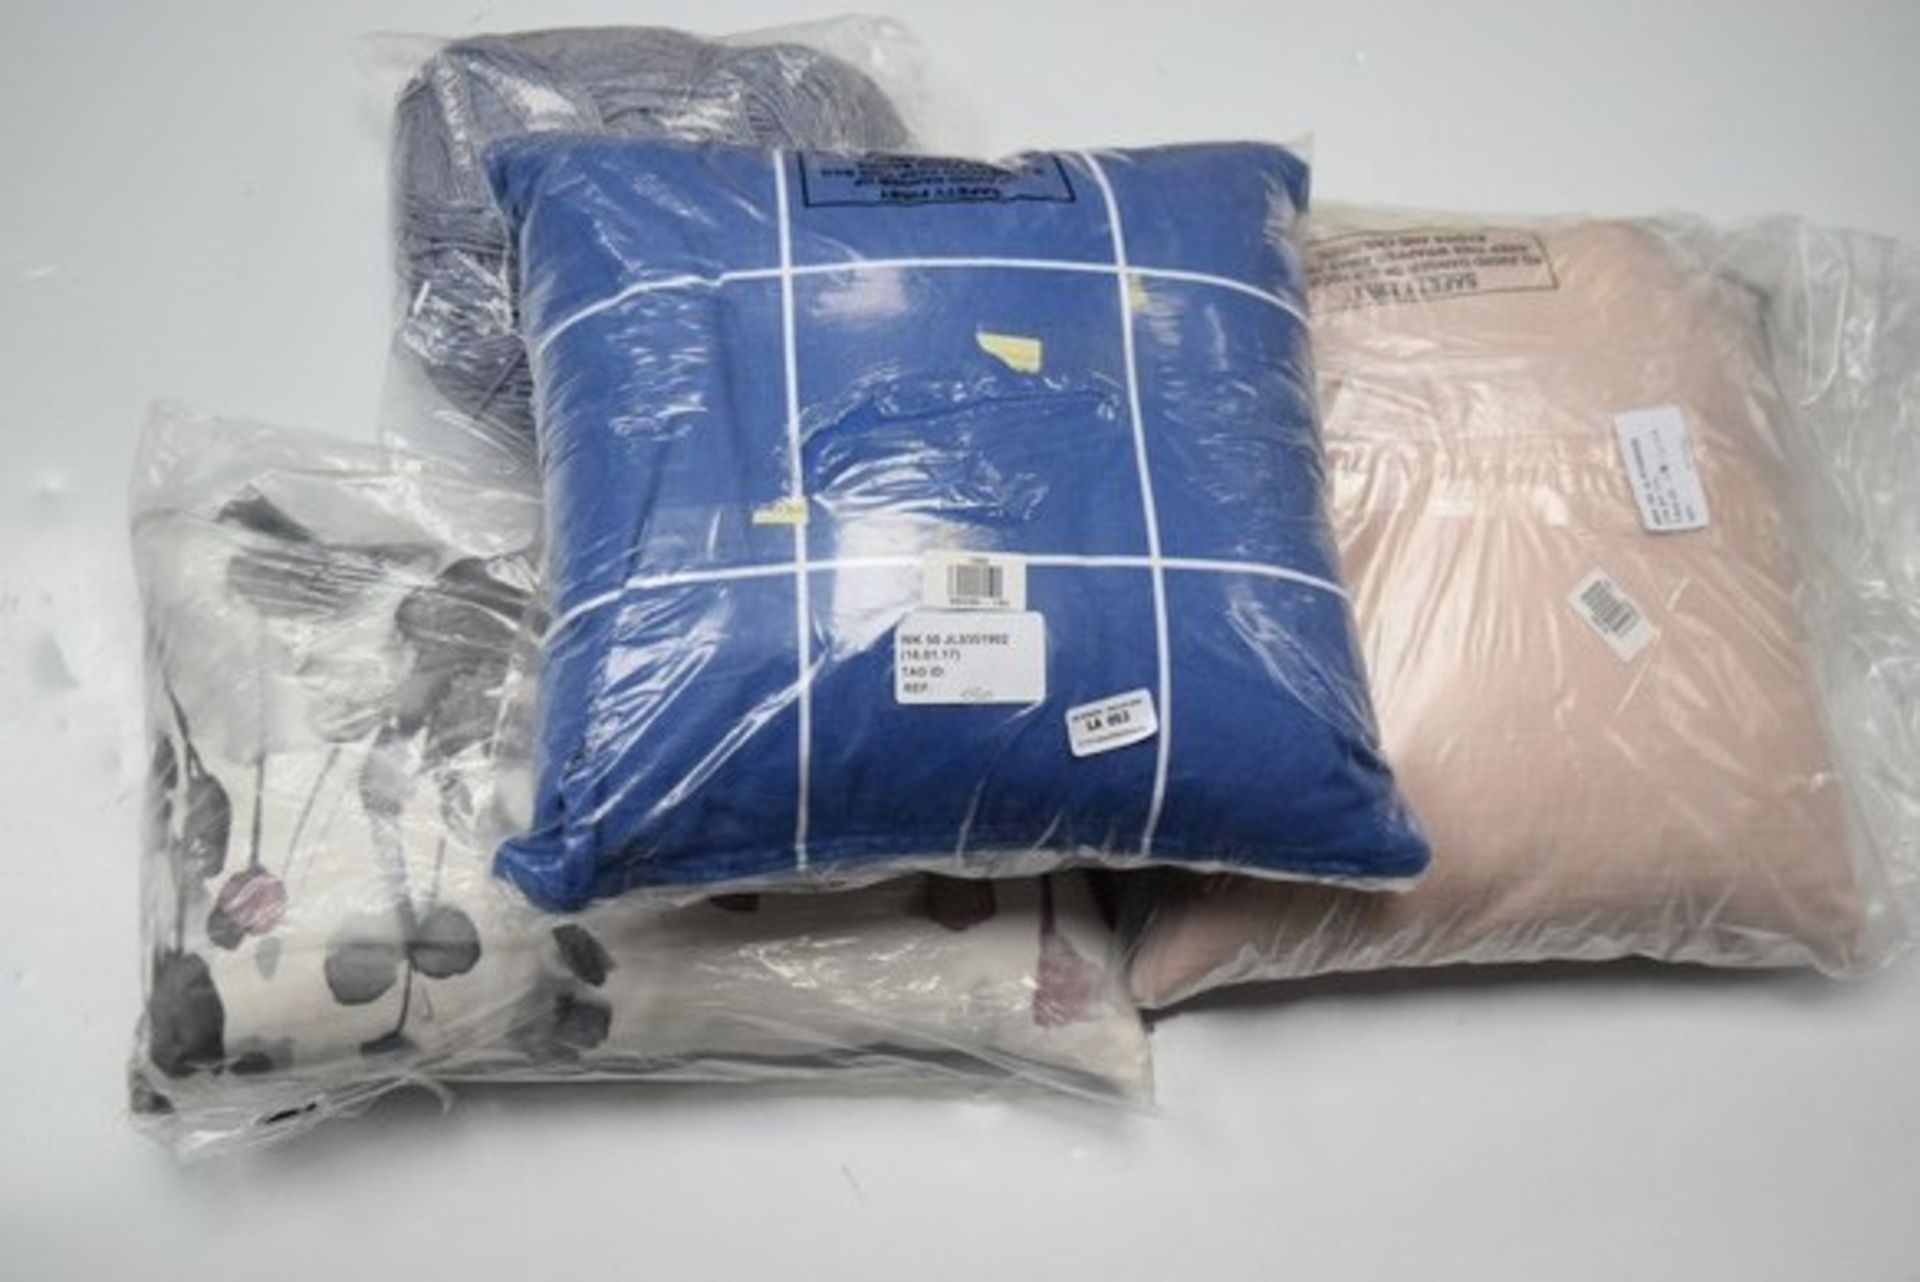 9 x DESIGNER BEDDING AND TEXTILE ITEMS COMBINED RRP £130 16.01.18 *PLEASE NOTE THAT THE BID PRICE IS